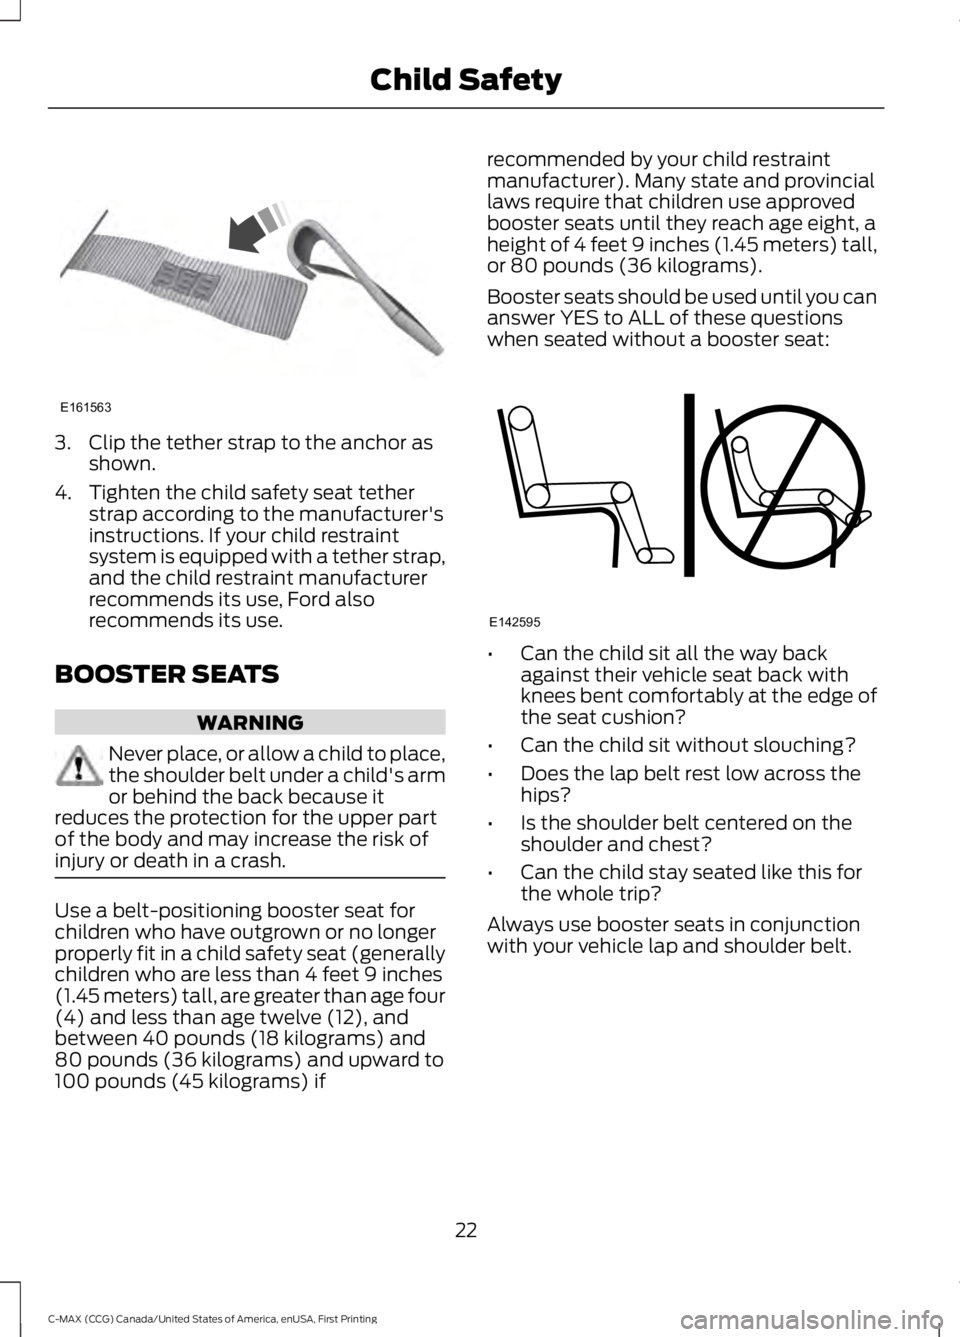 FORD C MAX 2016 Owners Manual 3. Clip the tether strap to the anchor as
shown.
4. Tighten the child safety seat tether strap according to the manufacturer's
instructions. If your child restraint
system is equipped with a tethe